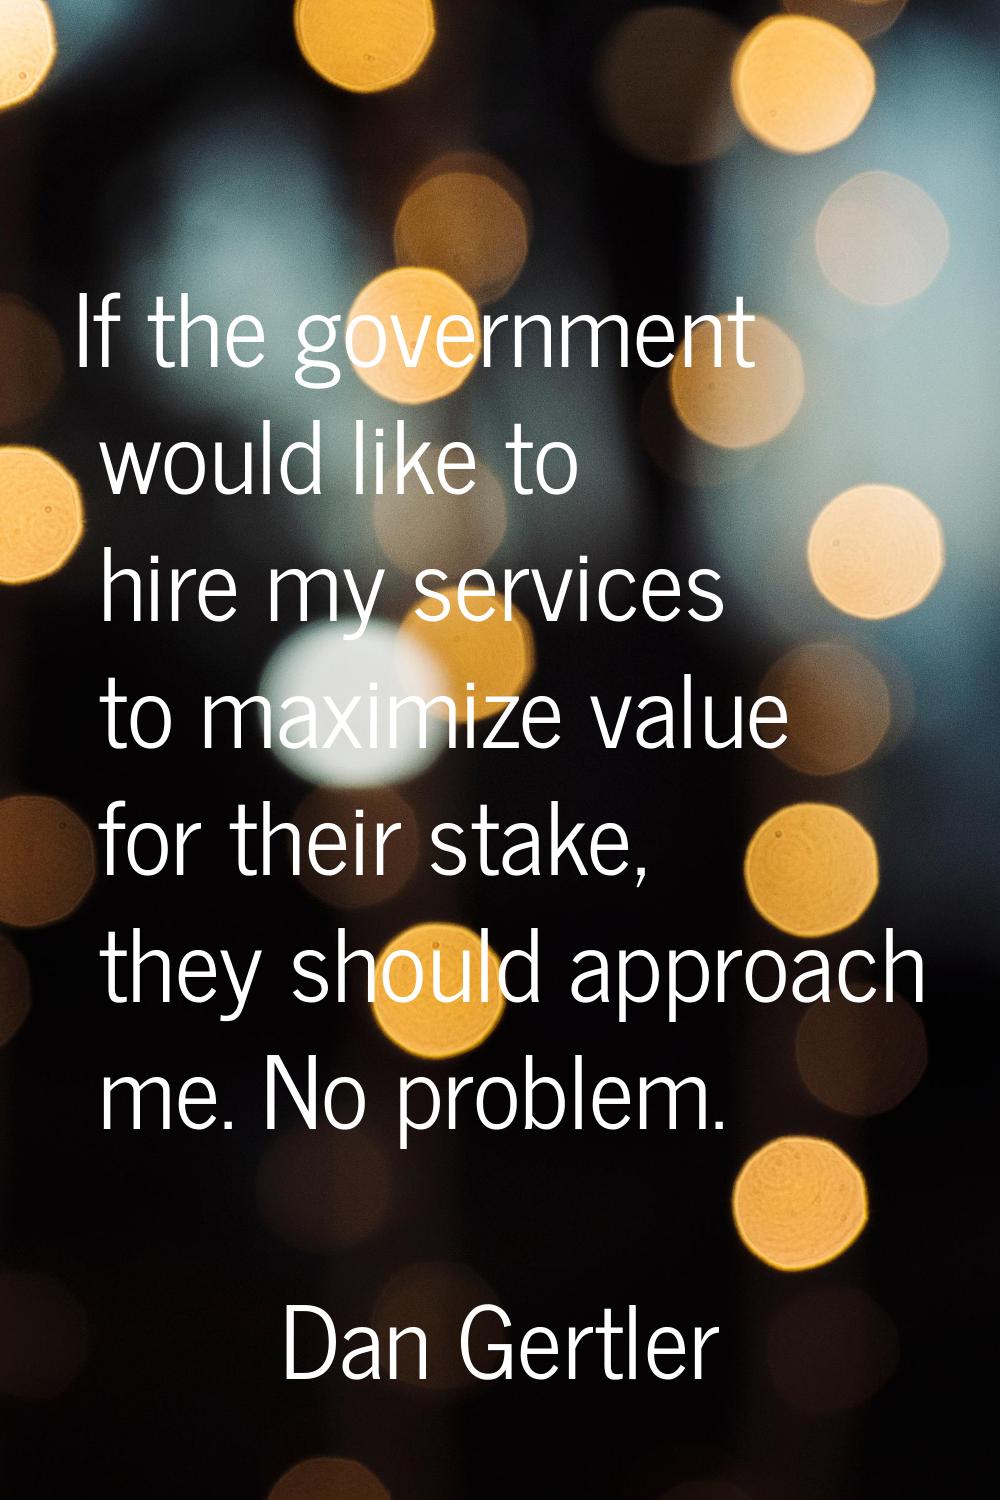 If the government would like to hire my services to maximize value for their stake, they should app